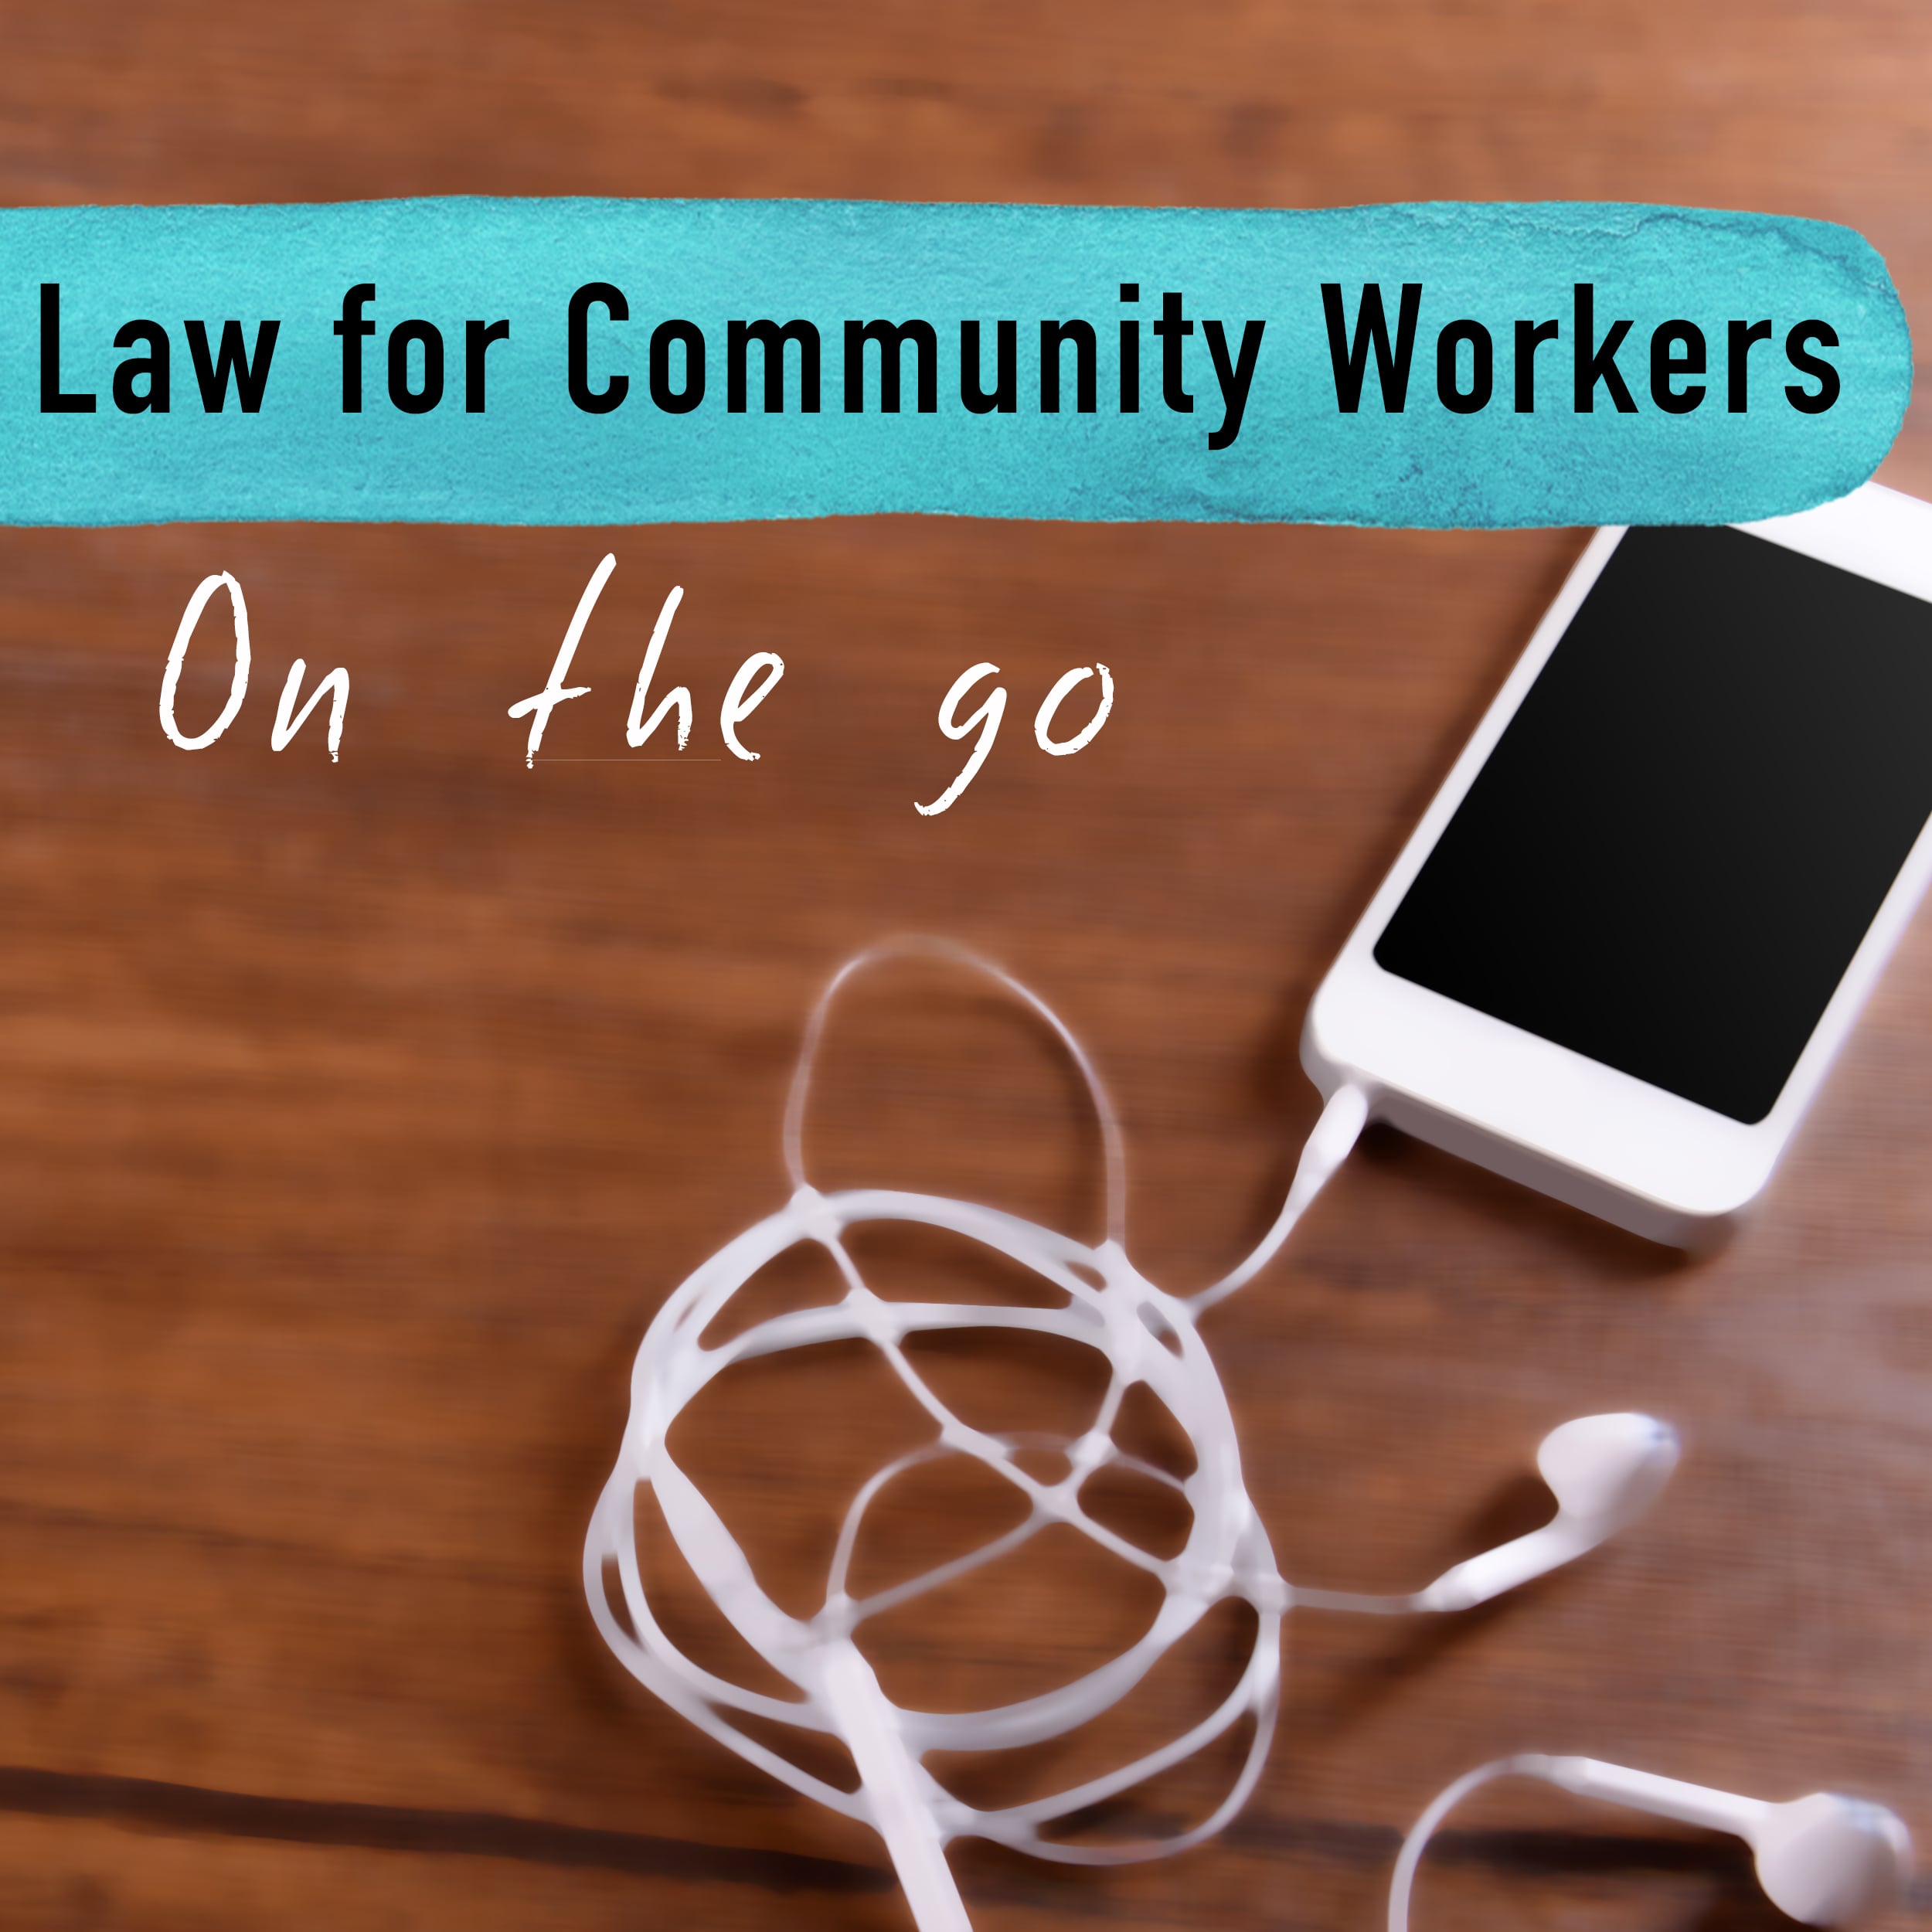 Law Workers the NSW. Aid on for Legal go. Community